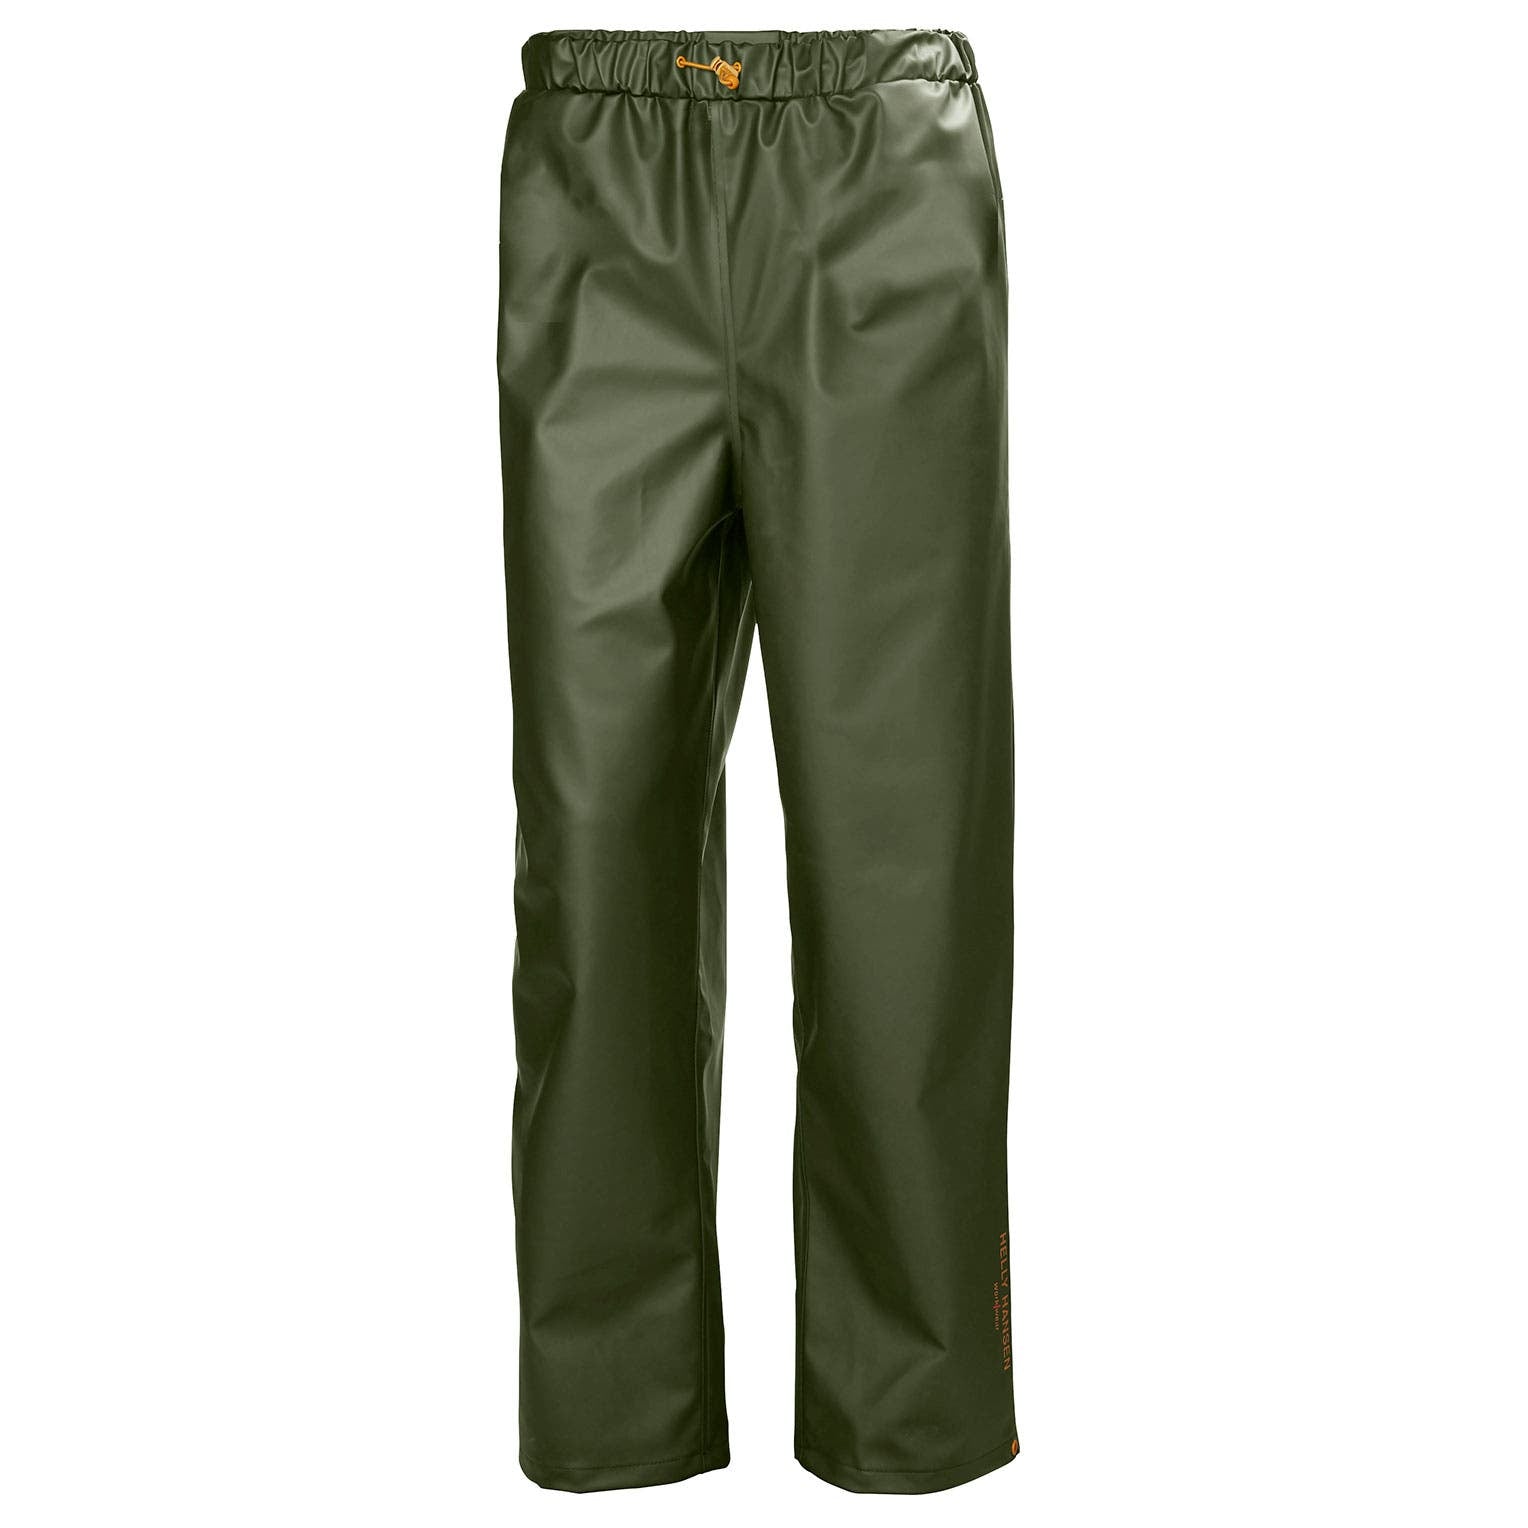 Helly Hansen Men's Gale Rain Pant in Army Green from the front